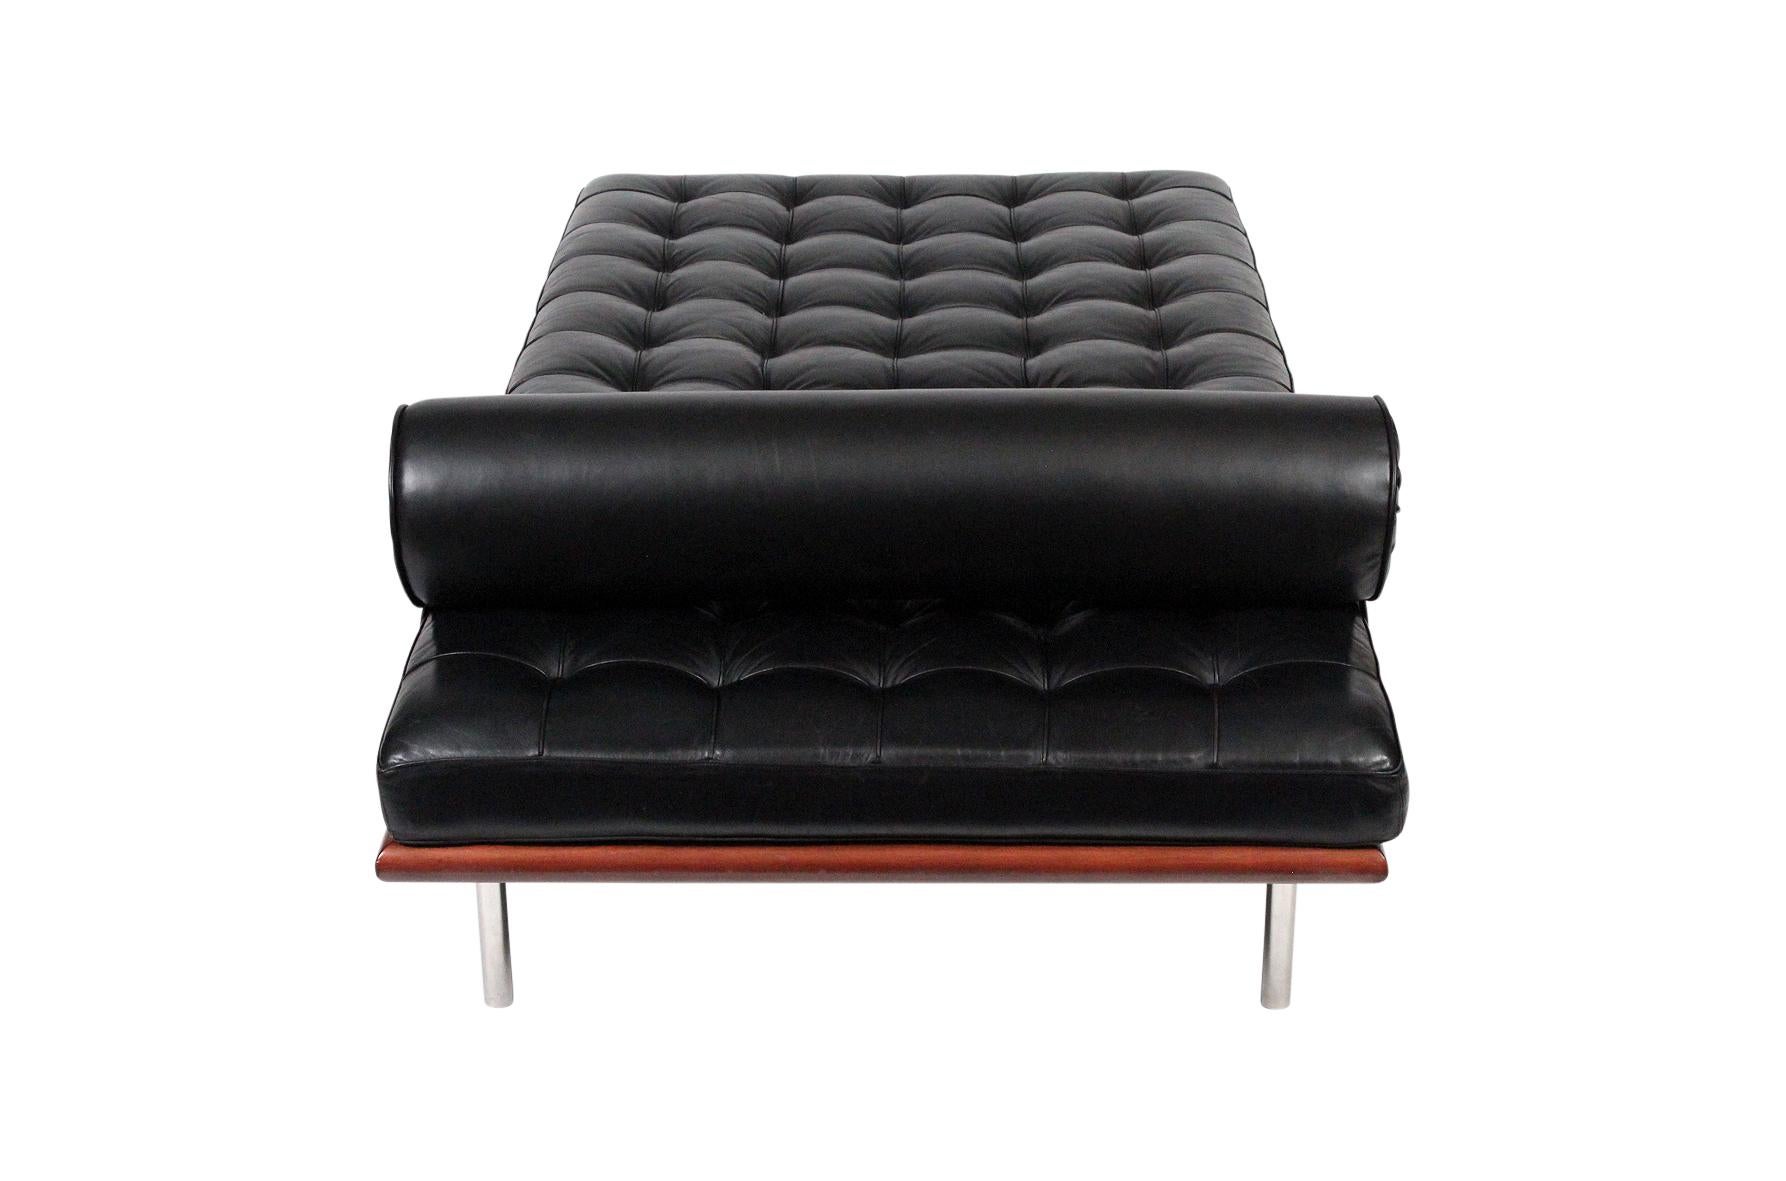 Mid-Century Modern Barcelona Daybed by Ludwig Mies van der Rohe for Knoll